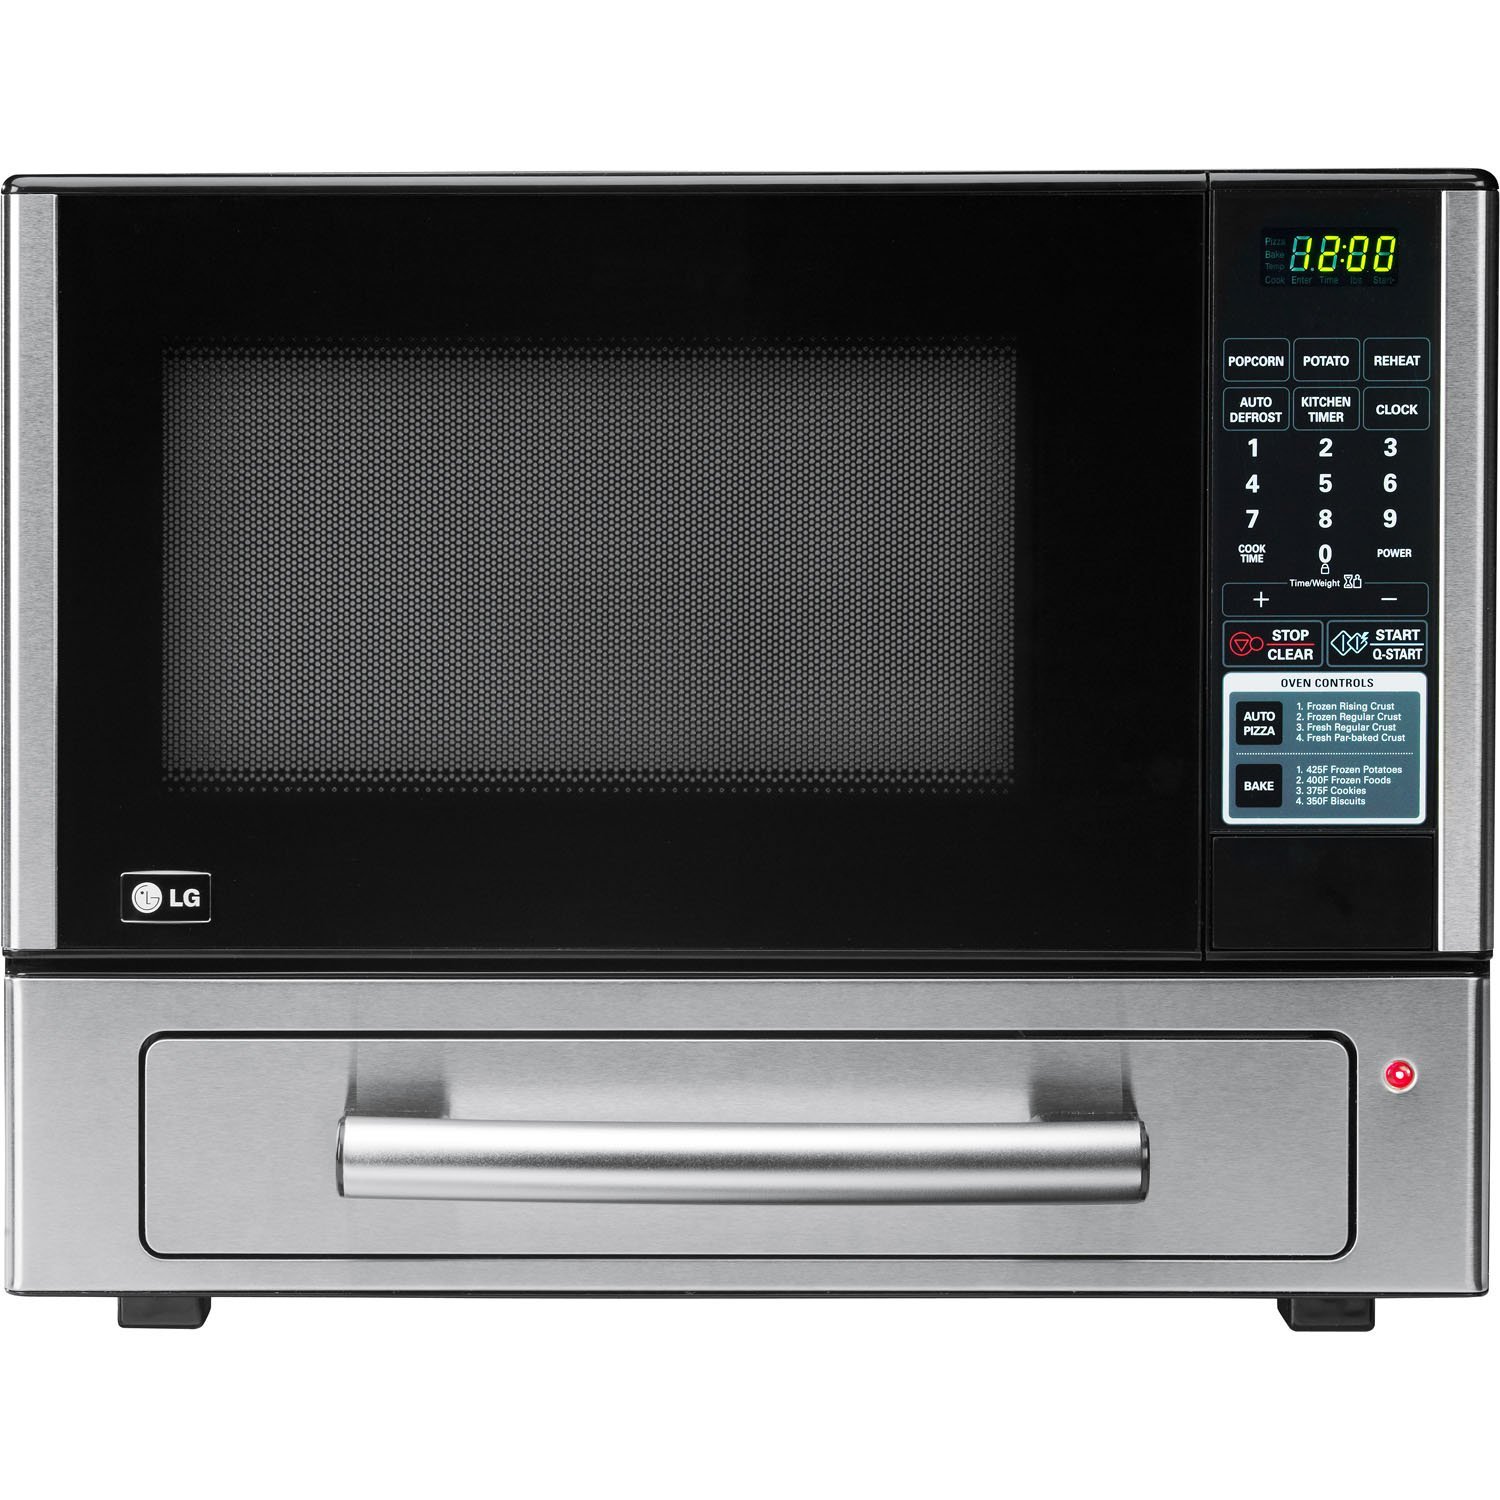 LG LCSP1110ST 1.1 Cu Ft Counter Top Combo Microwave and Baking Oven, Stainless Steel